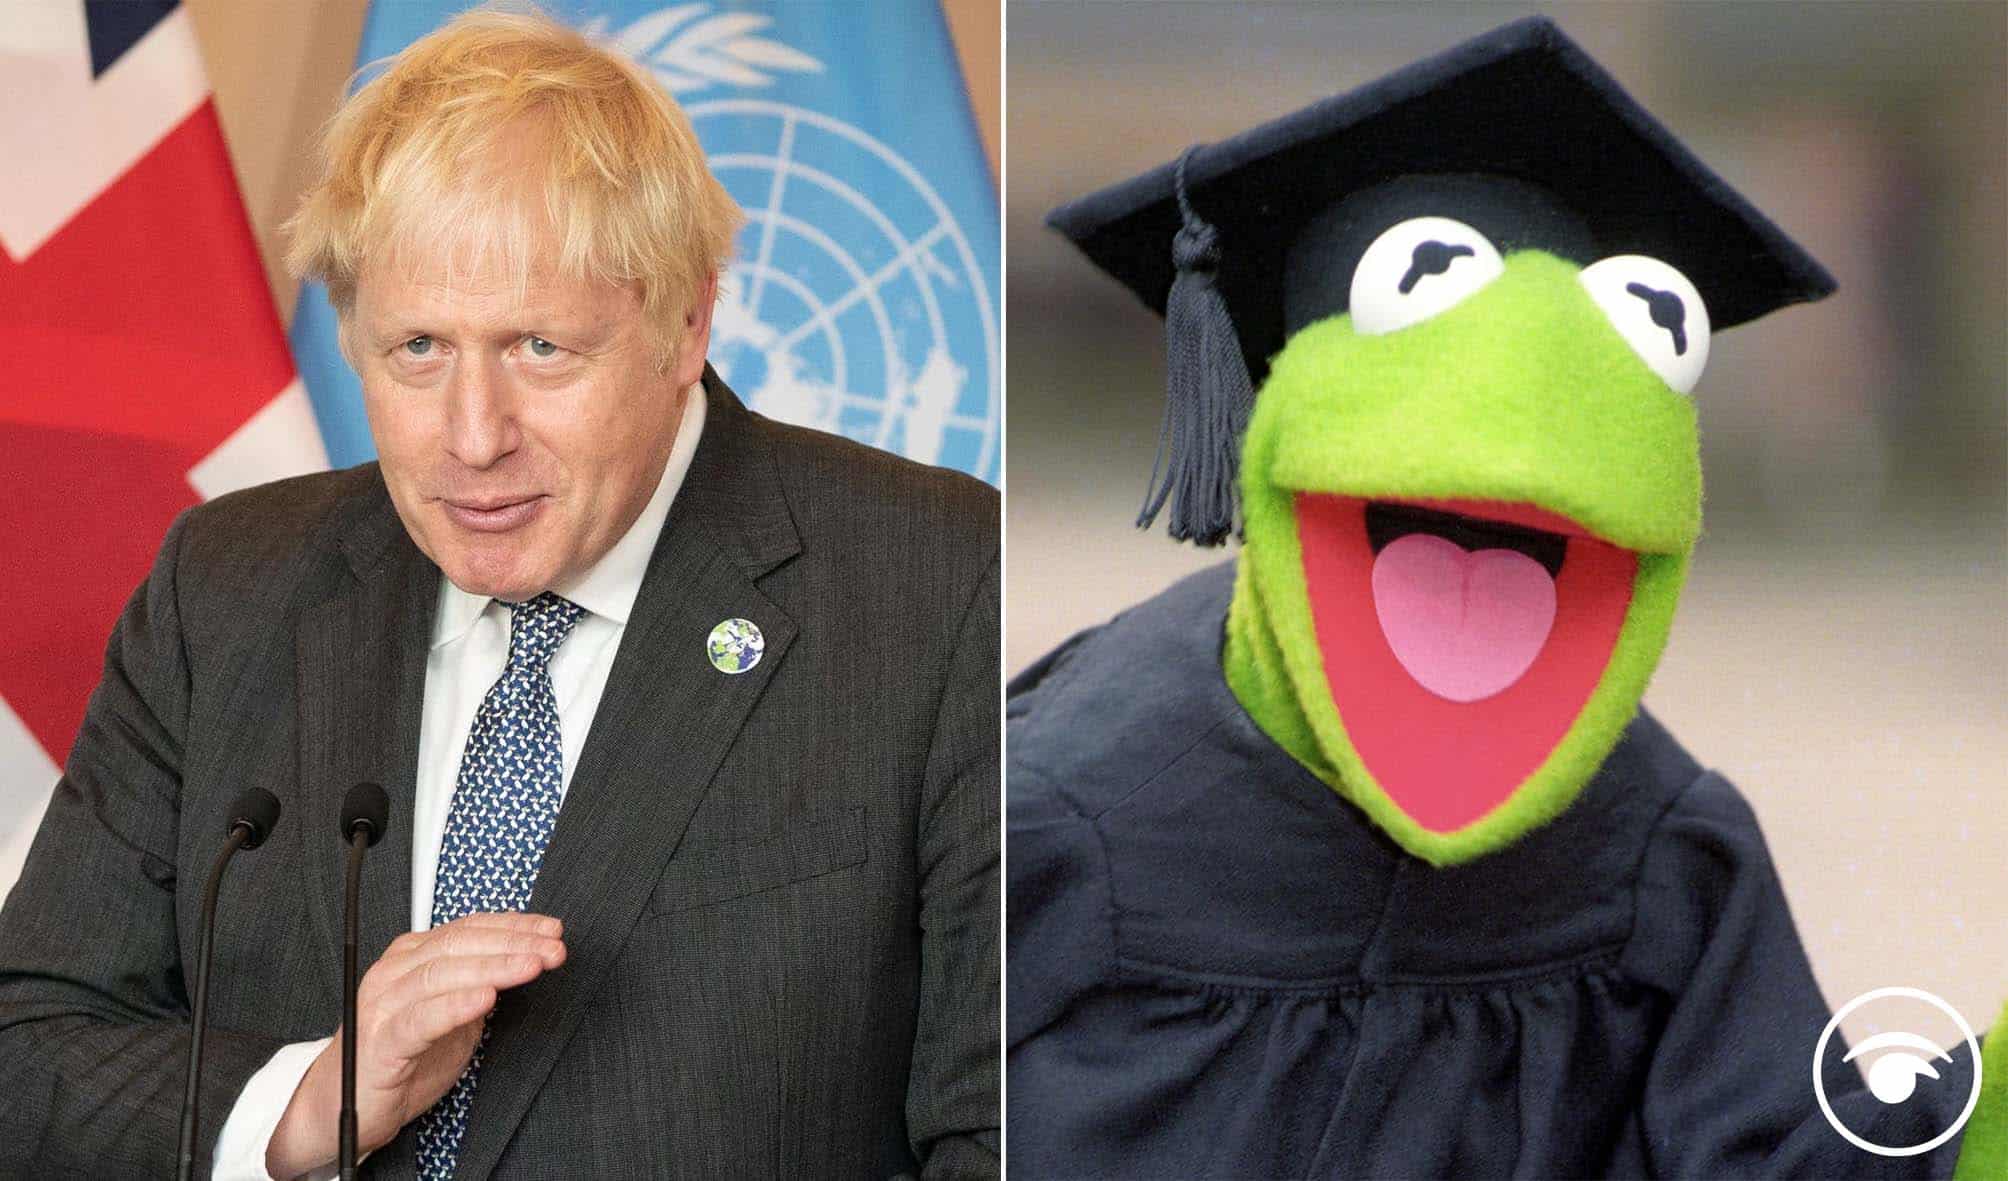 He croaked: PM’s Kermit the Frog joke falls flat at UN – and people leapt on it